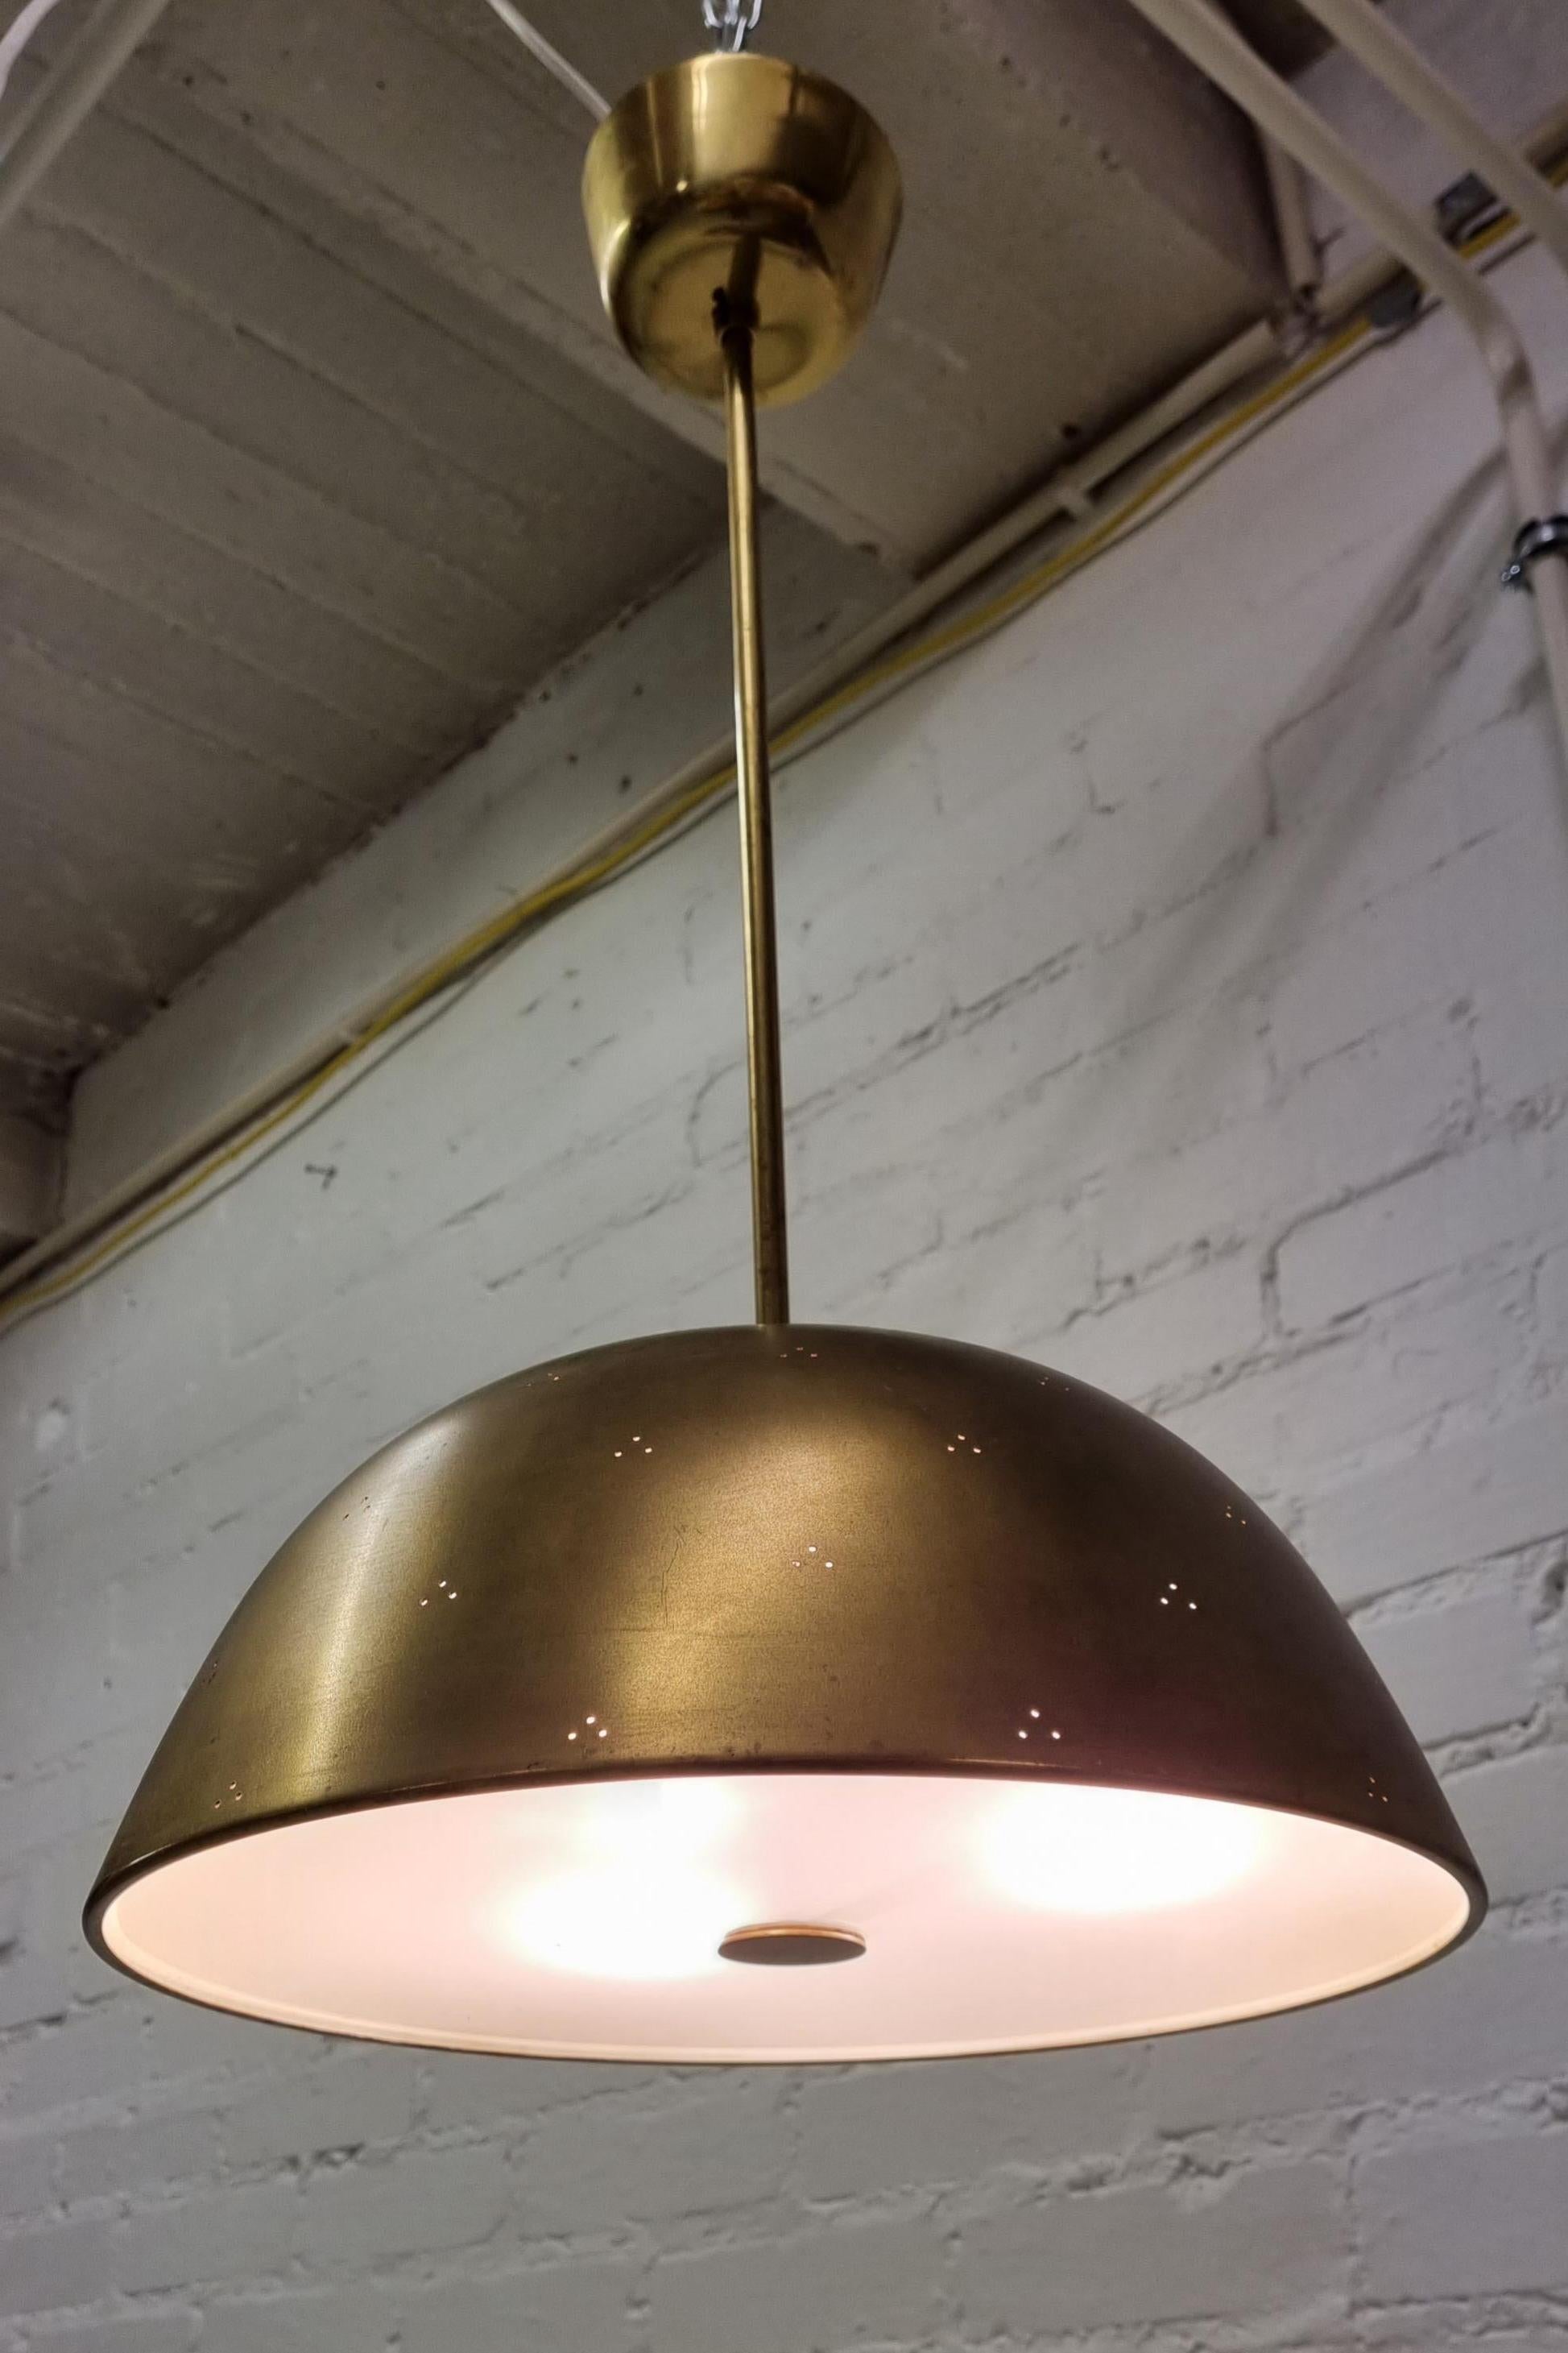 Very rare ceiling lamp model 1953 in its original condition by Finnish designer Paavo Tynell (1890–1973) for Taito.
The brass shade is perforated and the diffuser underneath is made of glass. Three light sources.
The overall impression of this